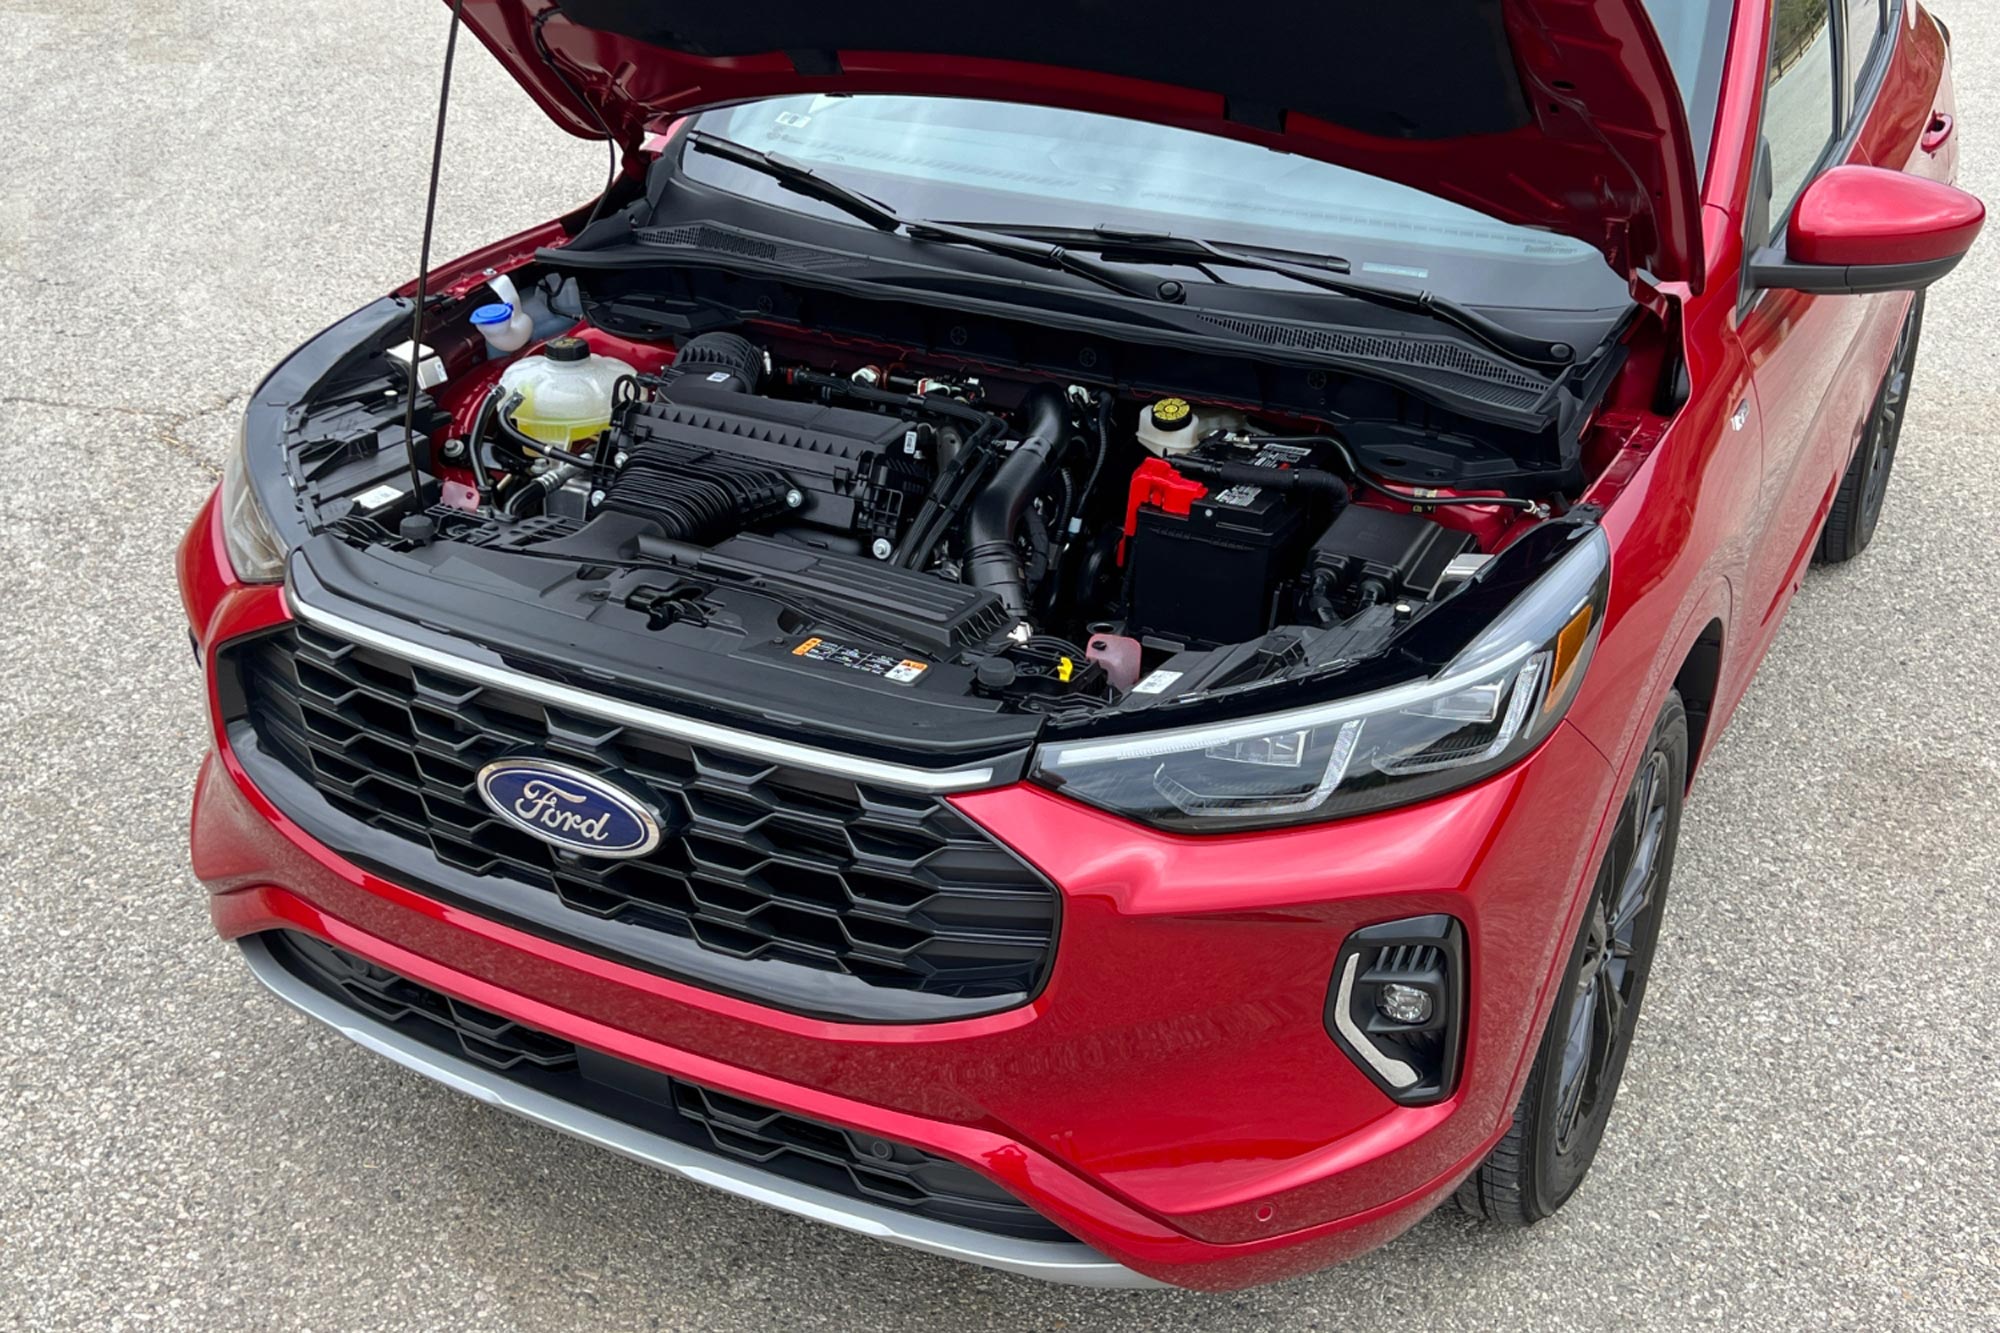 2023 Ford Escape in red open engine bay